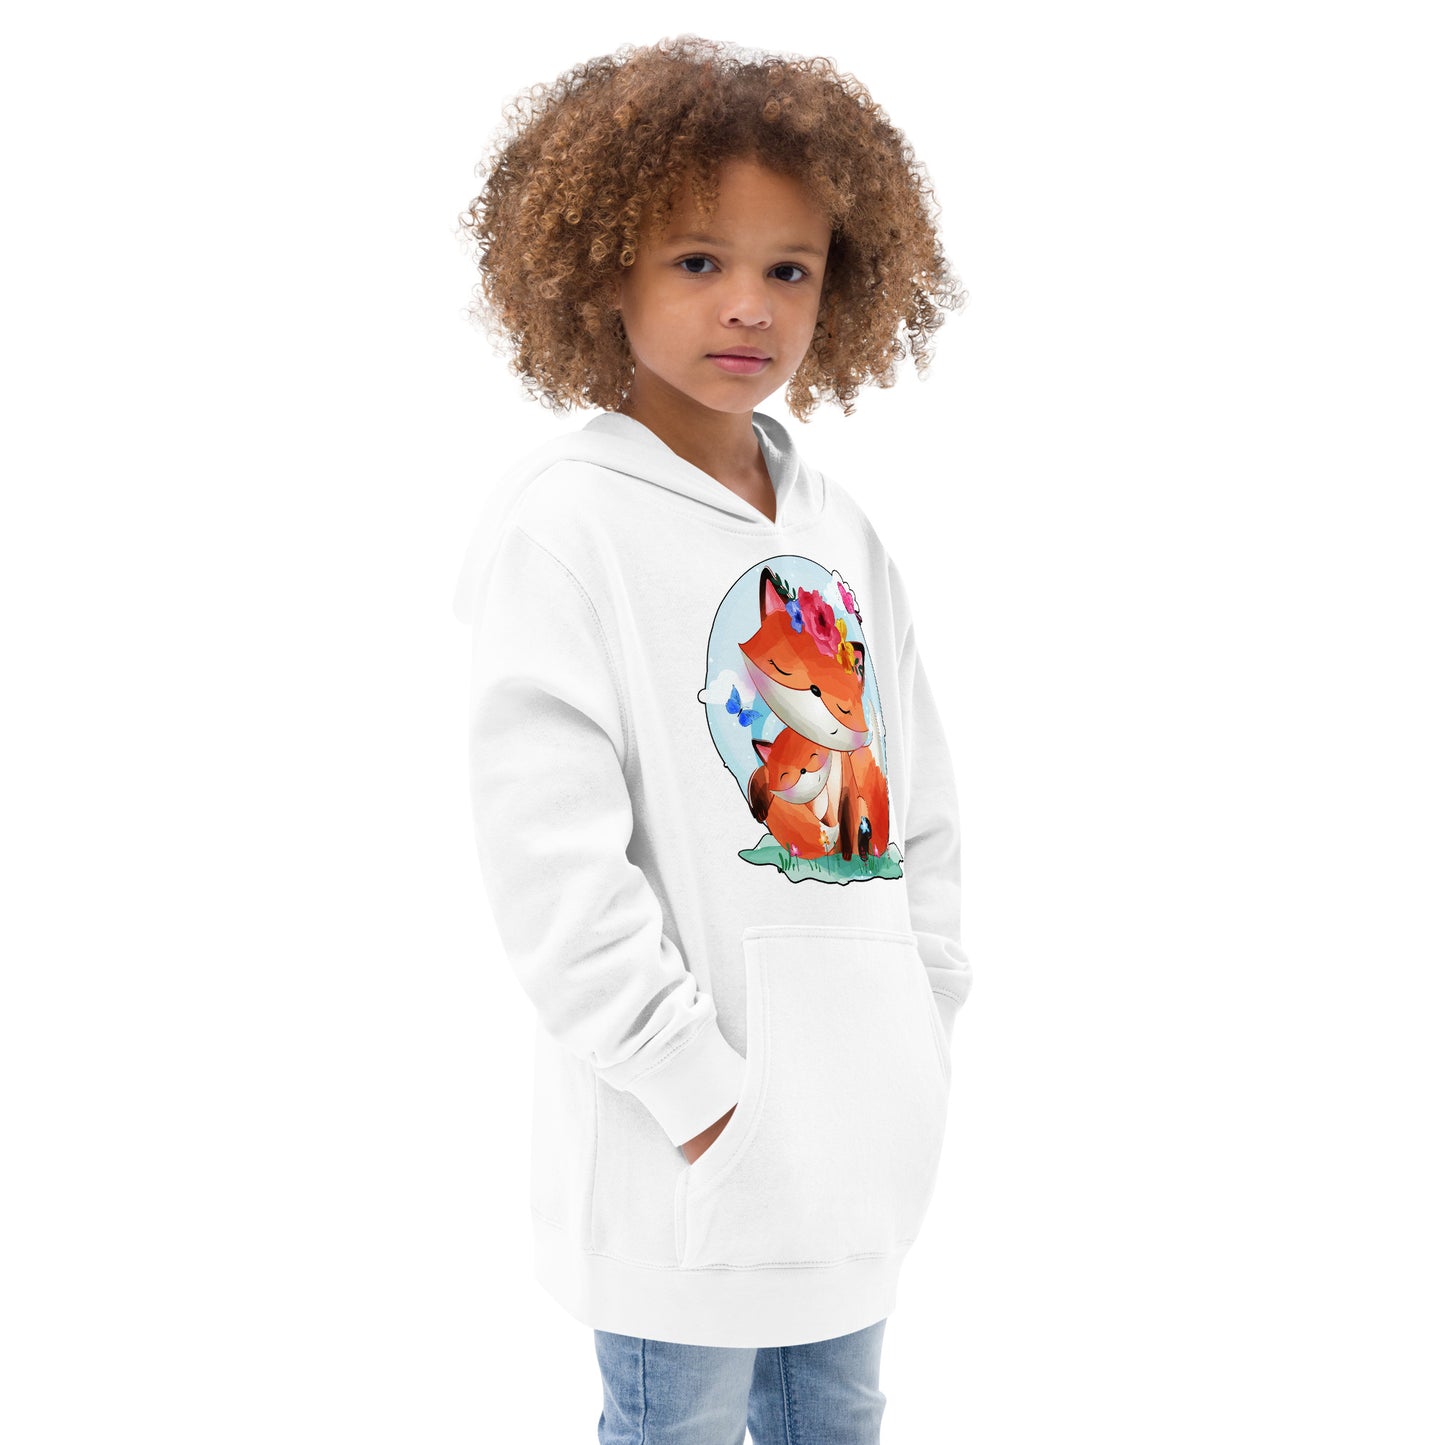 Lovely Mom and Baby Fox Hoodie, No. 0067